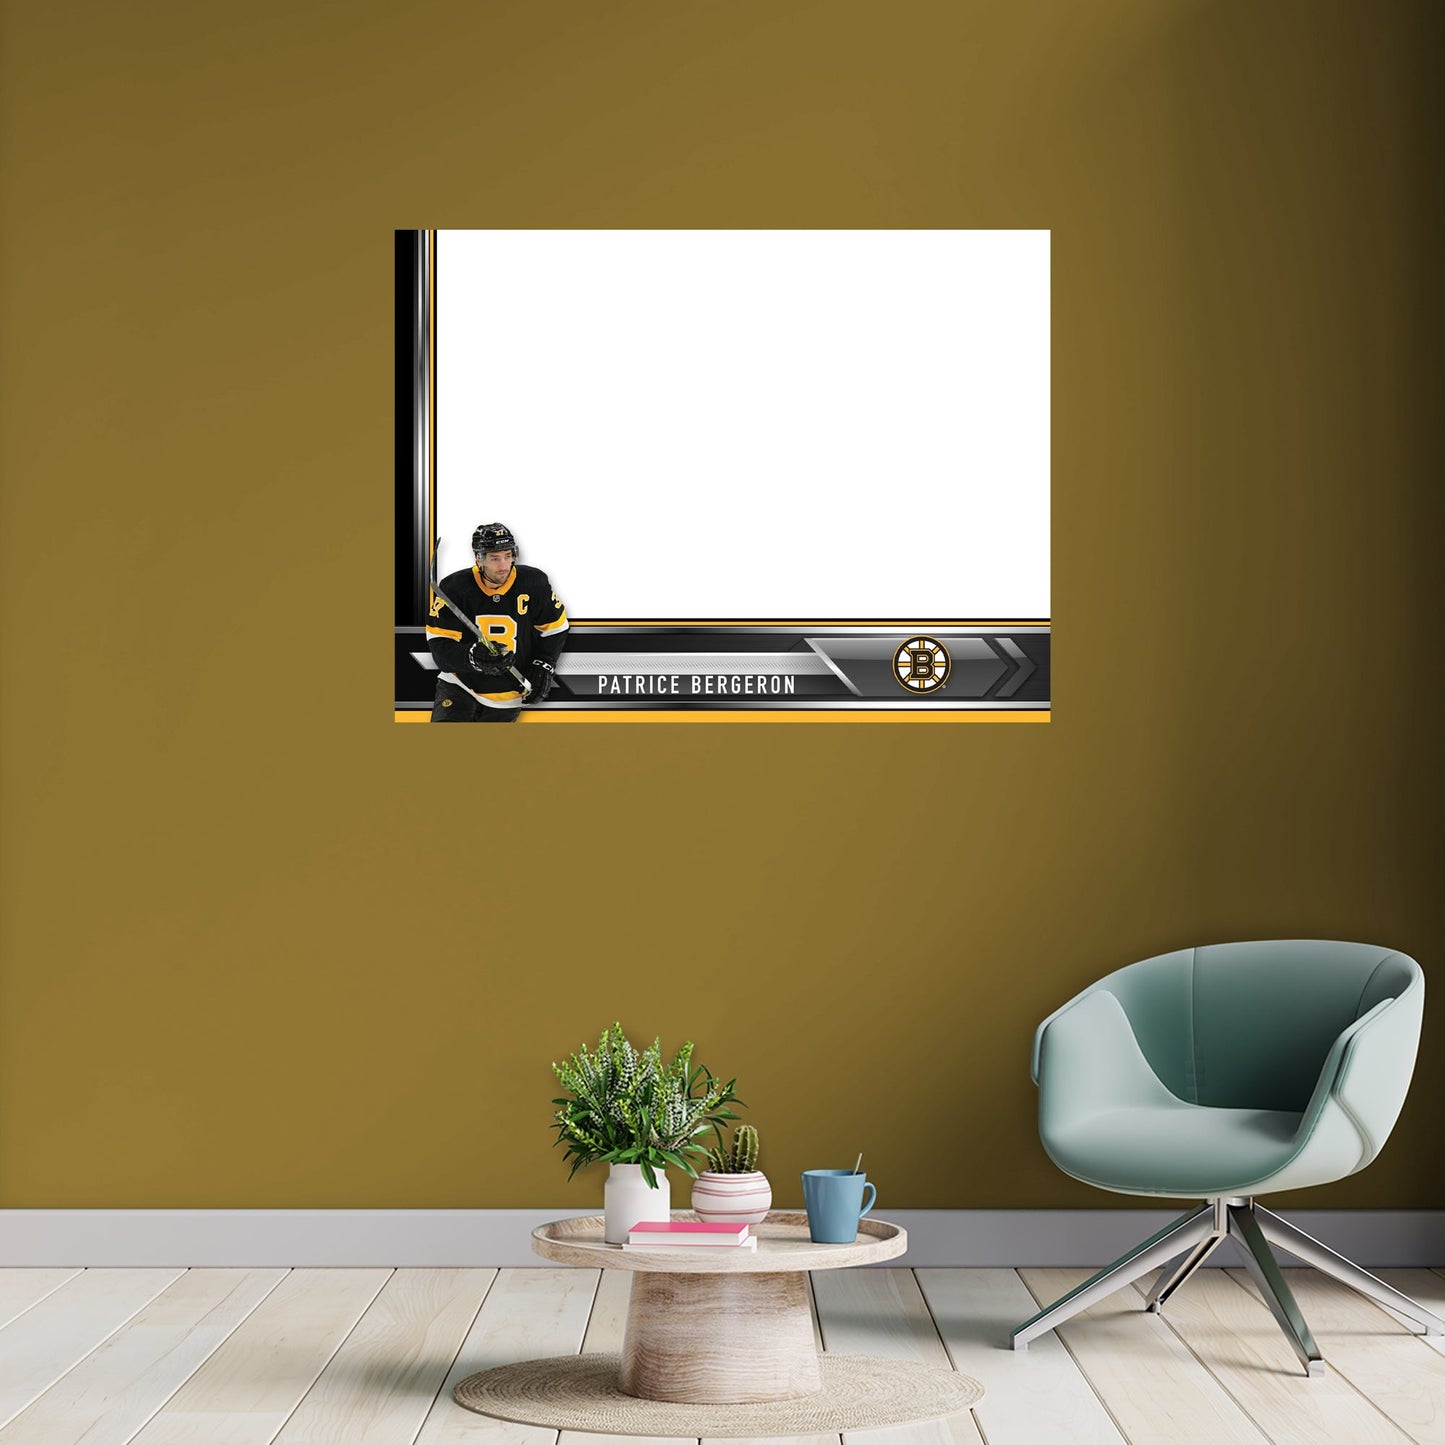 Boston Bruins: Patrice Bergeron Dry Erase Whiteboard - Officially Licensed NHL Removable Adhesive Decal